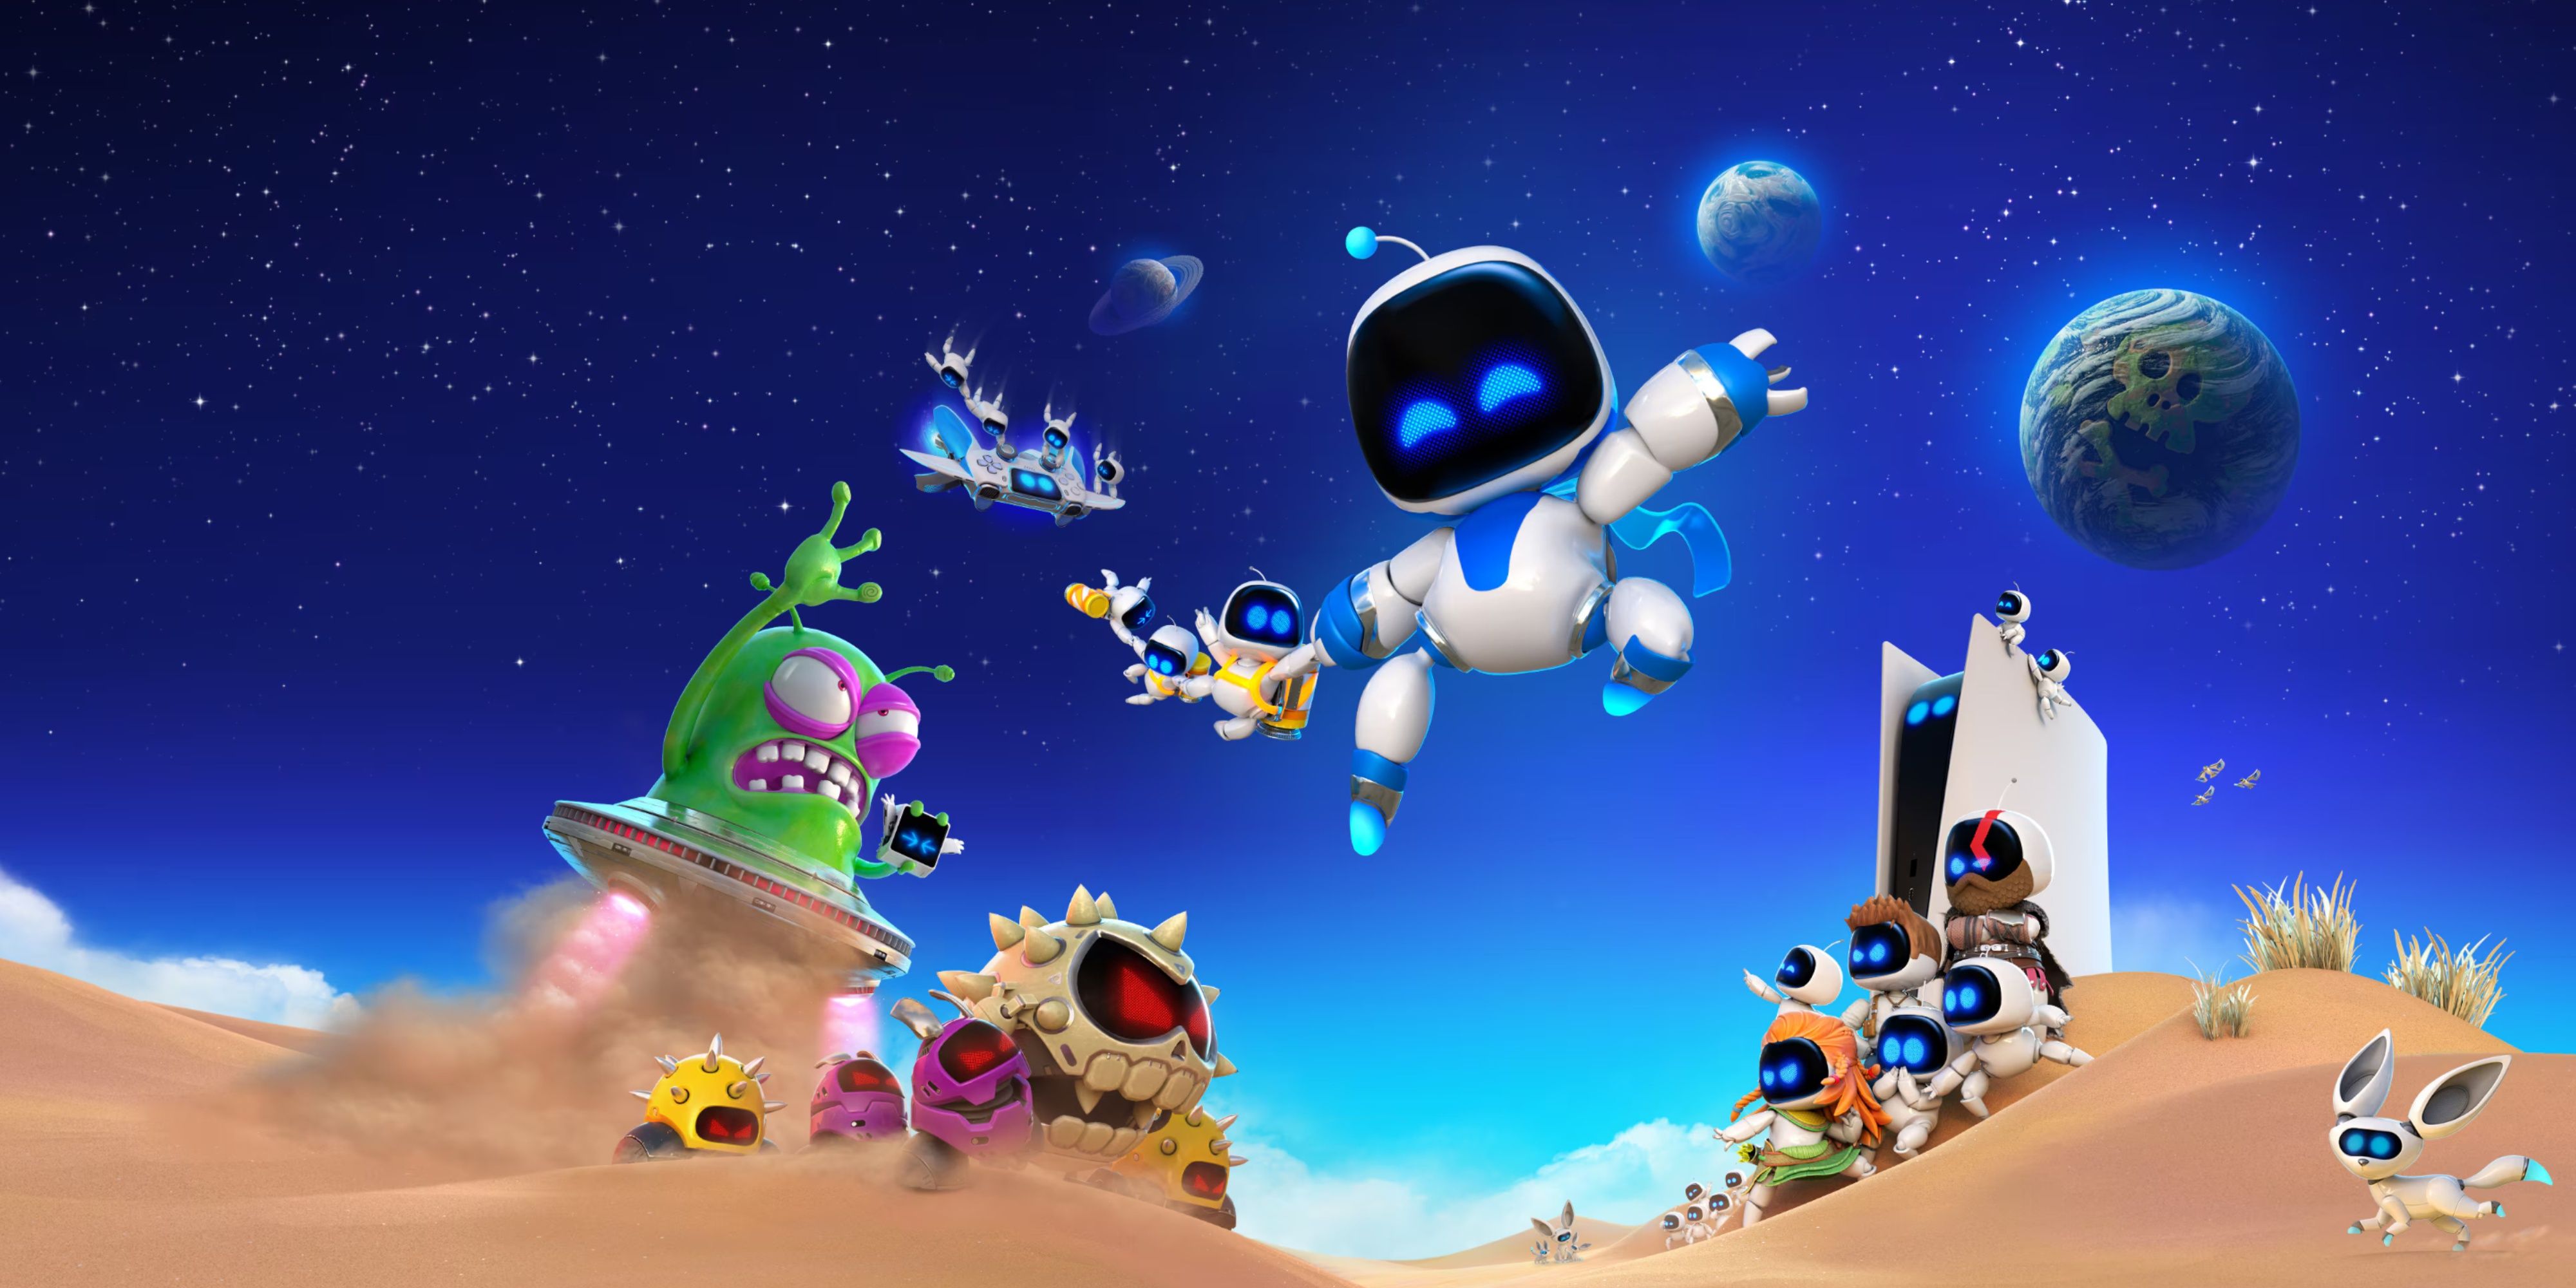 astro bot in the desert with enemies and other bots